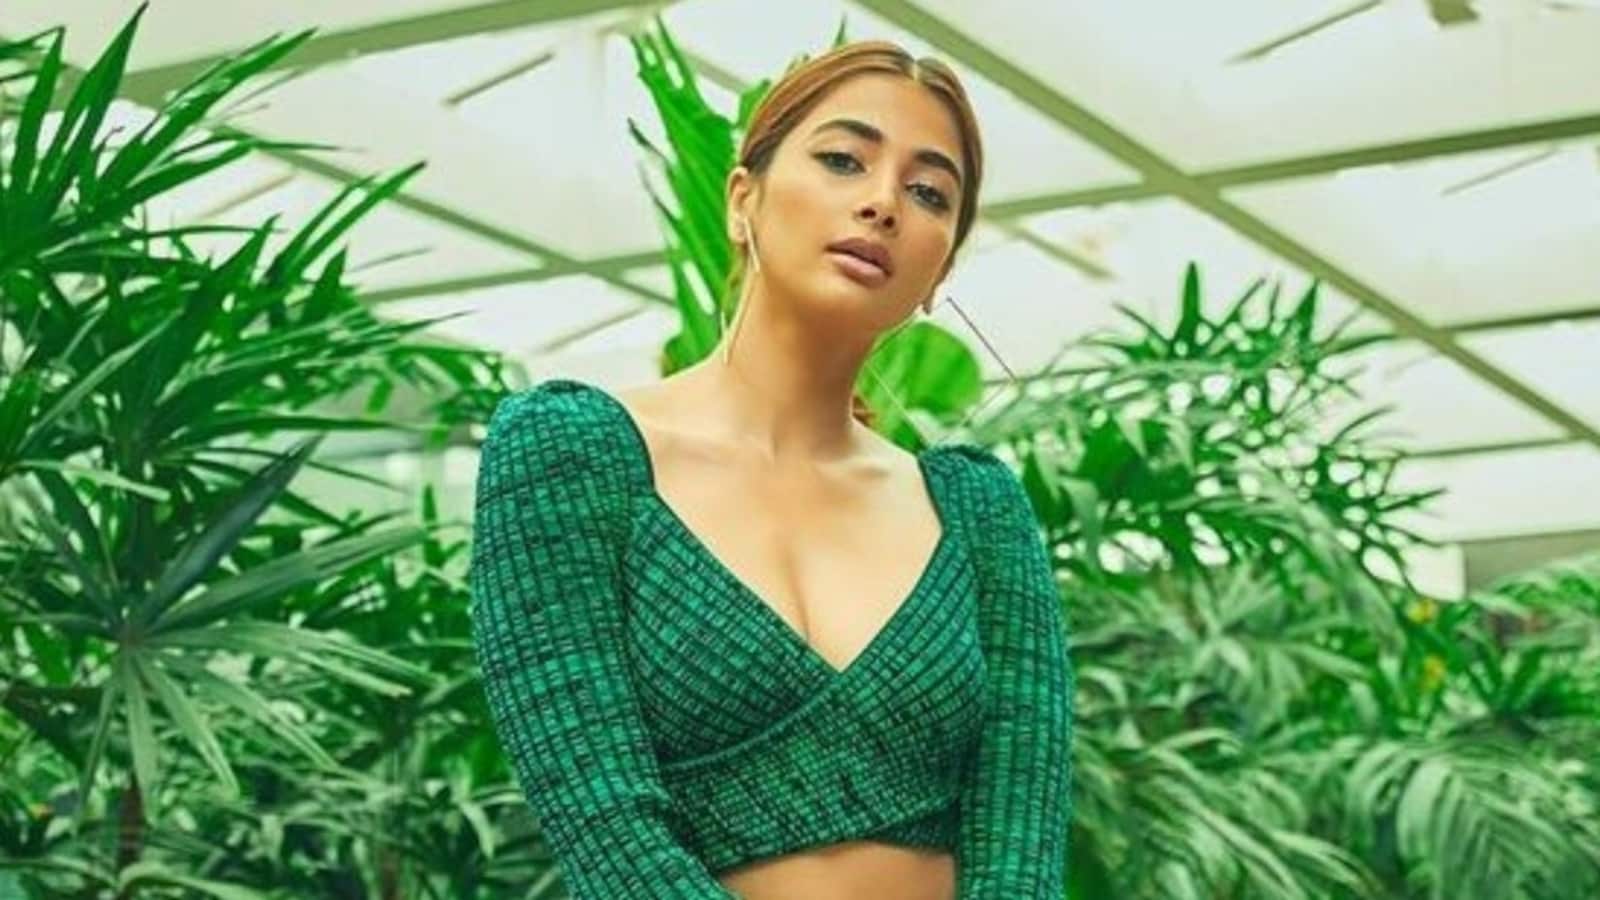 Pooja Hegde serves a ‘daily dose of greens’ in smoking hot crop blouse and thigh-slit skirt worth ₹42k: See pics